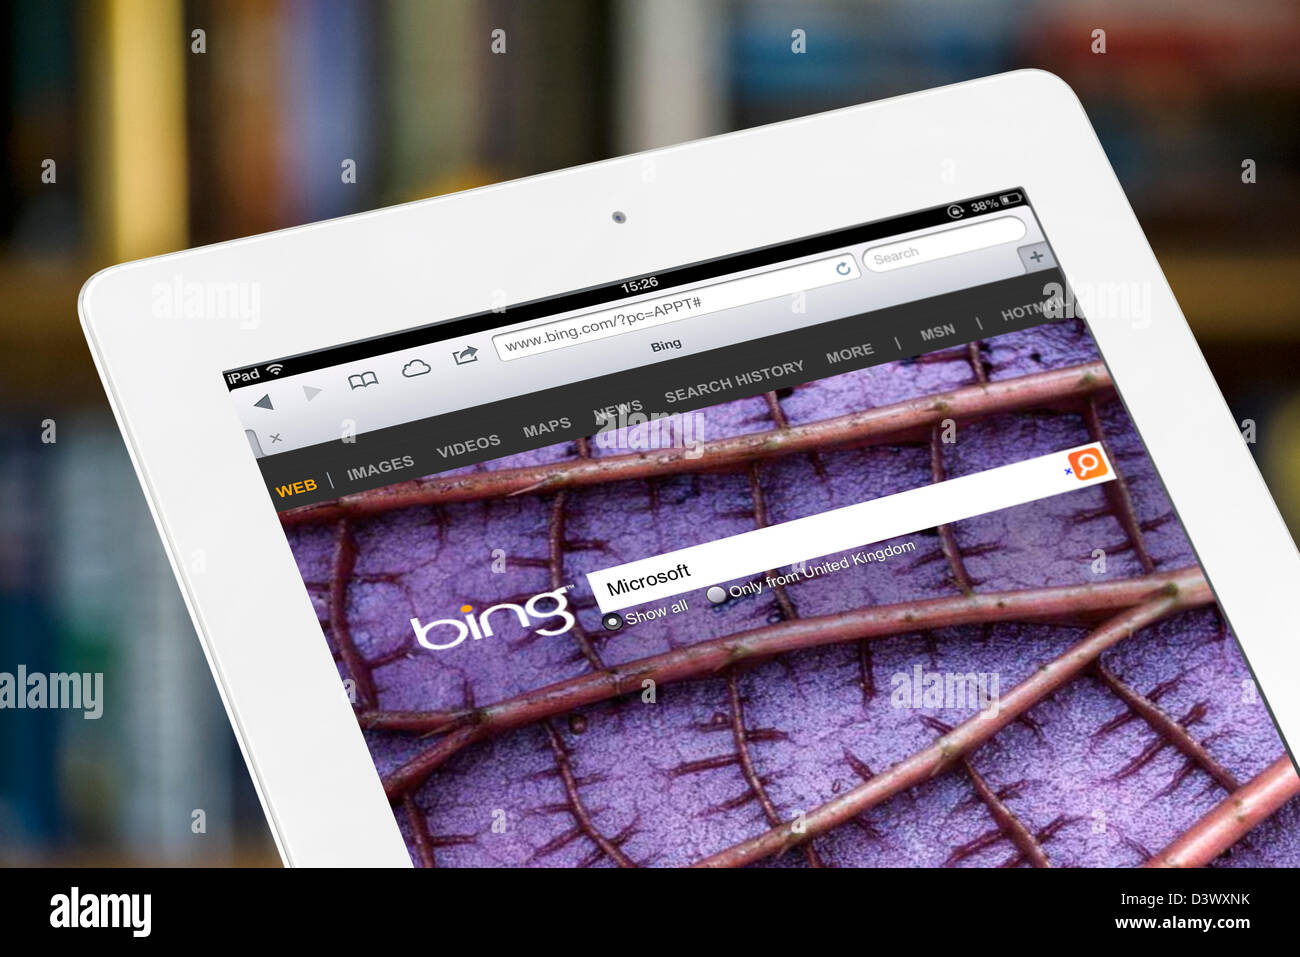 Bing search viewed on a 4th generation iPad Stock Photo